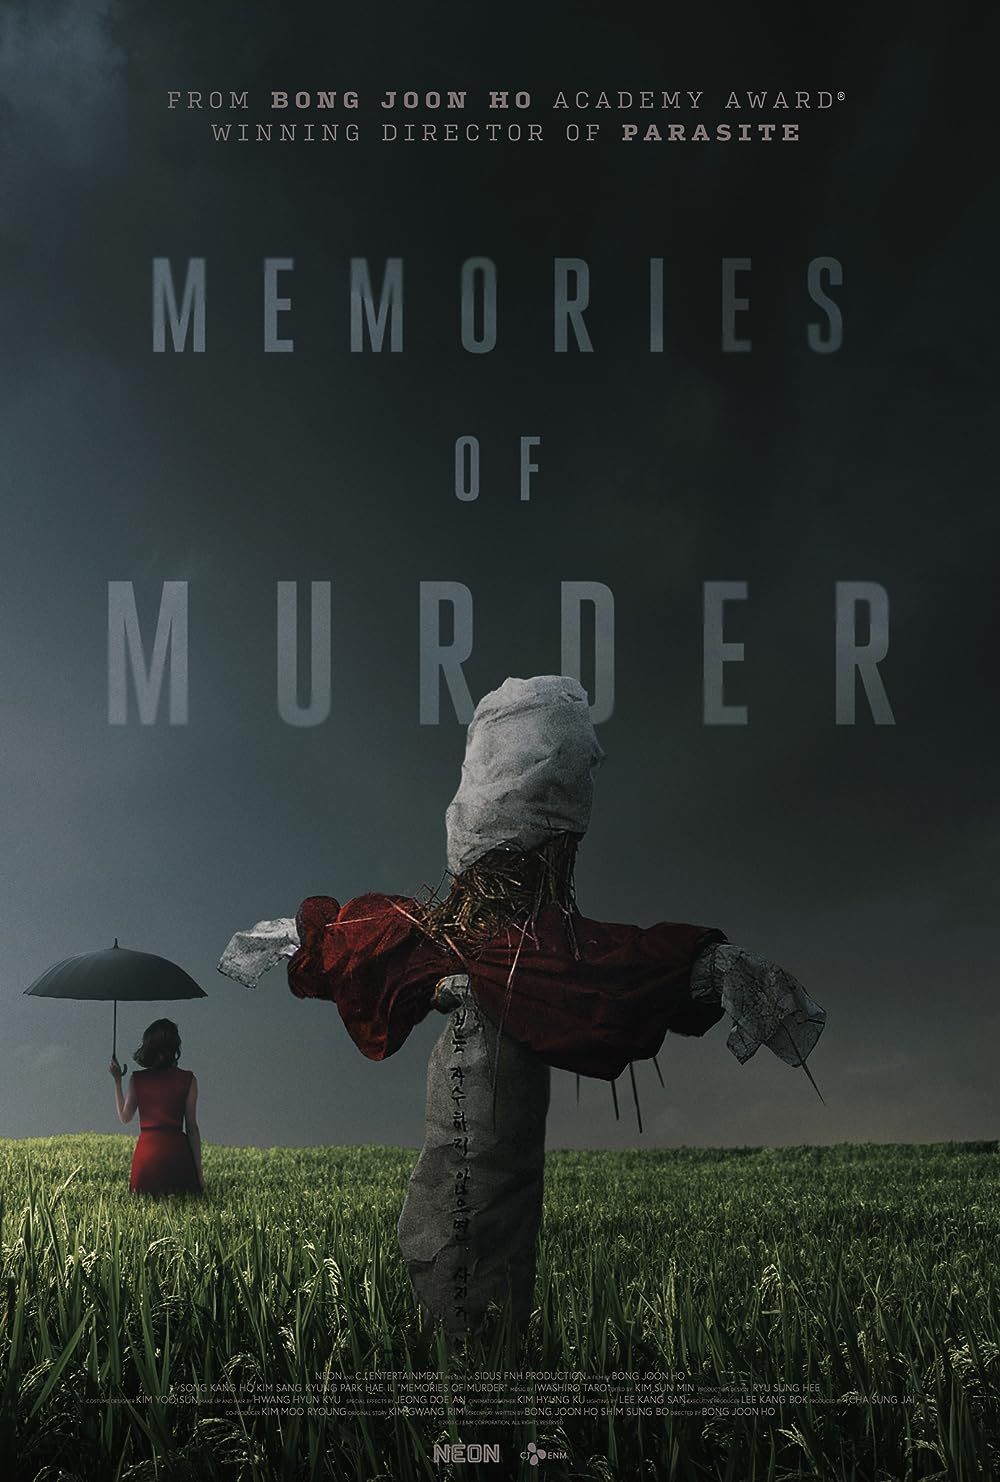 A Scarecrow and a woman with an umbrella in a field on the Memories of Murder poster